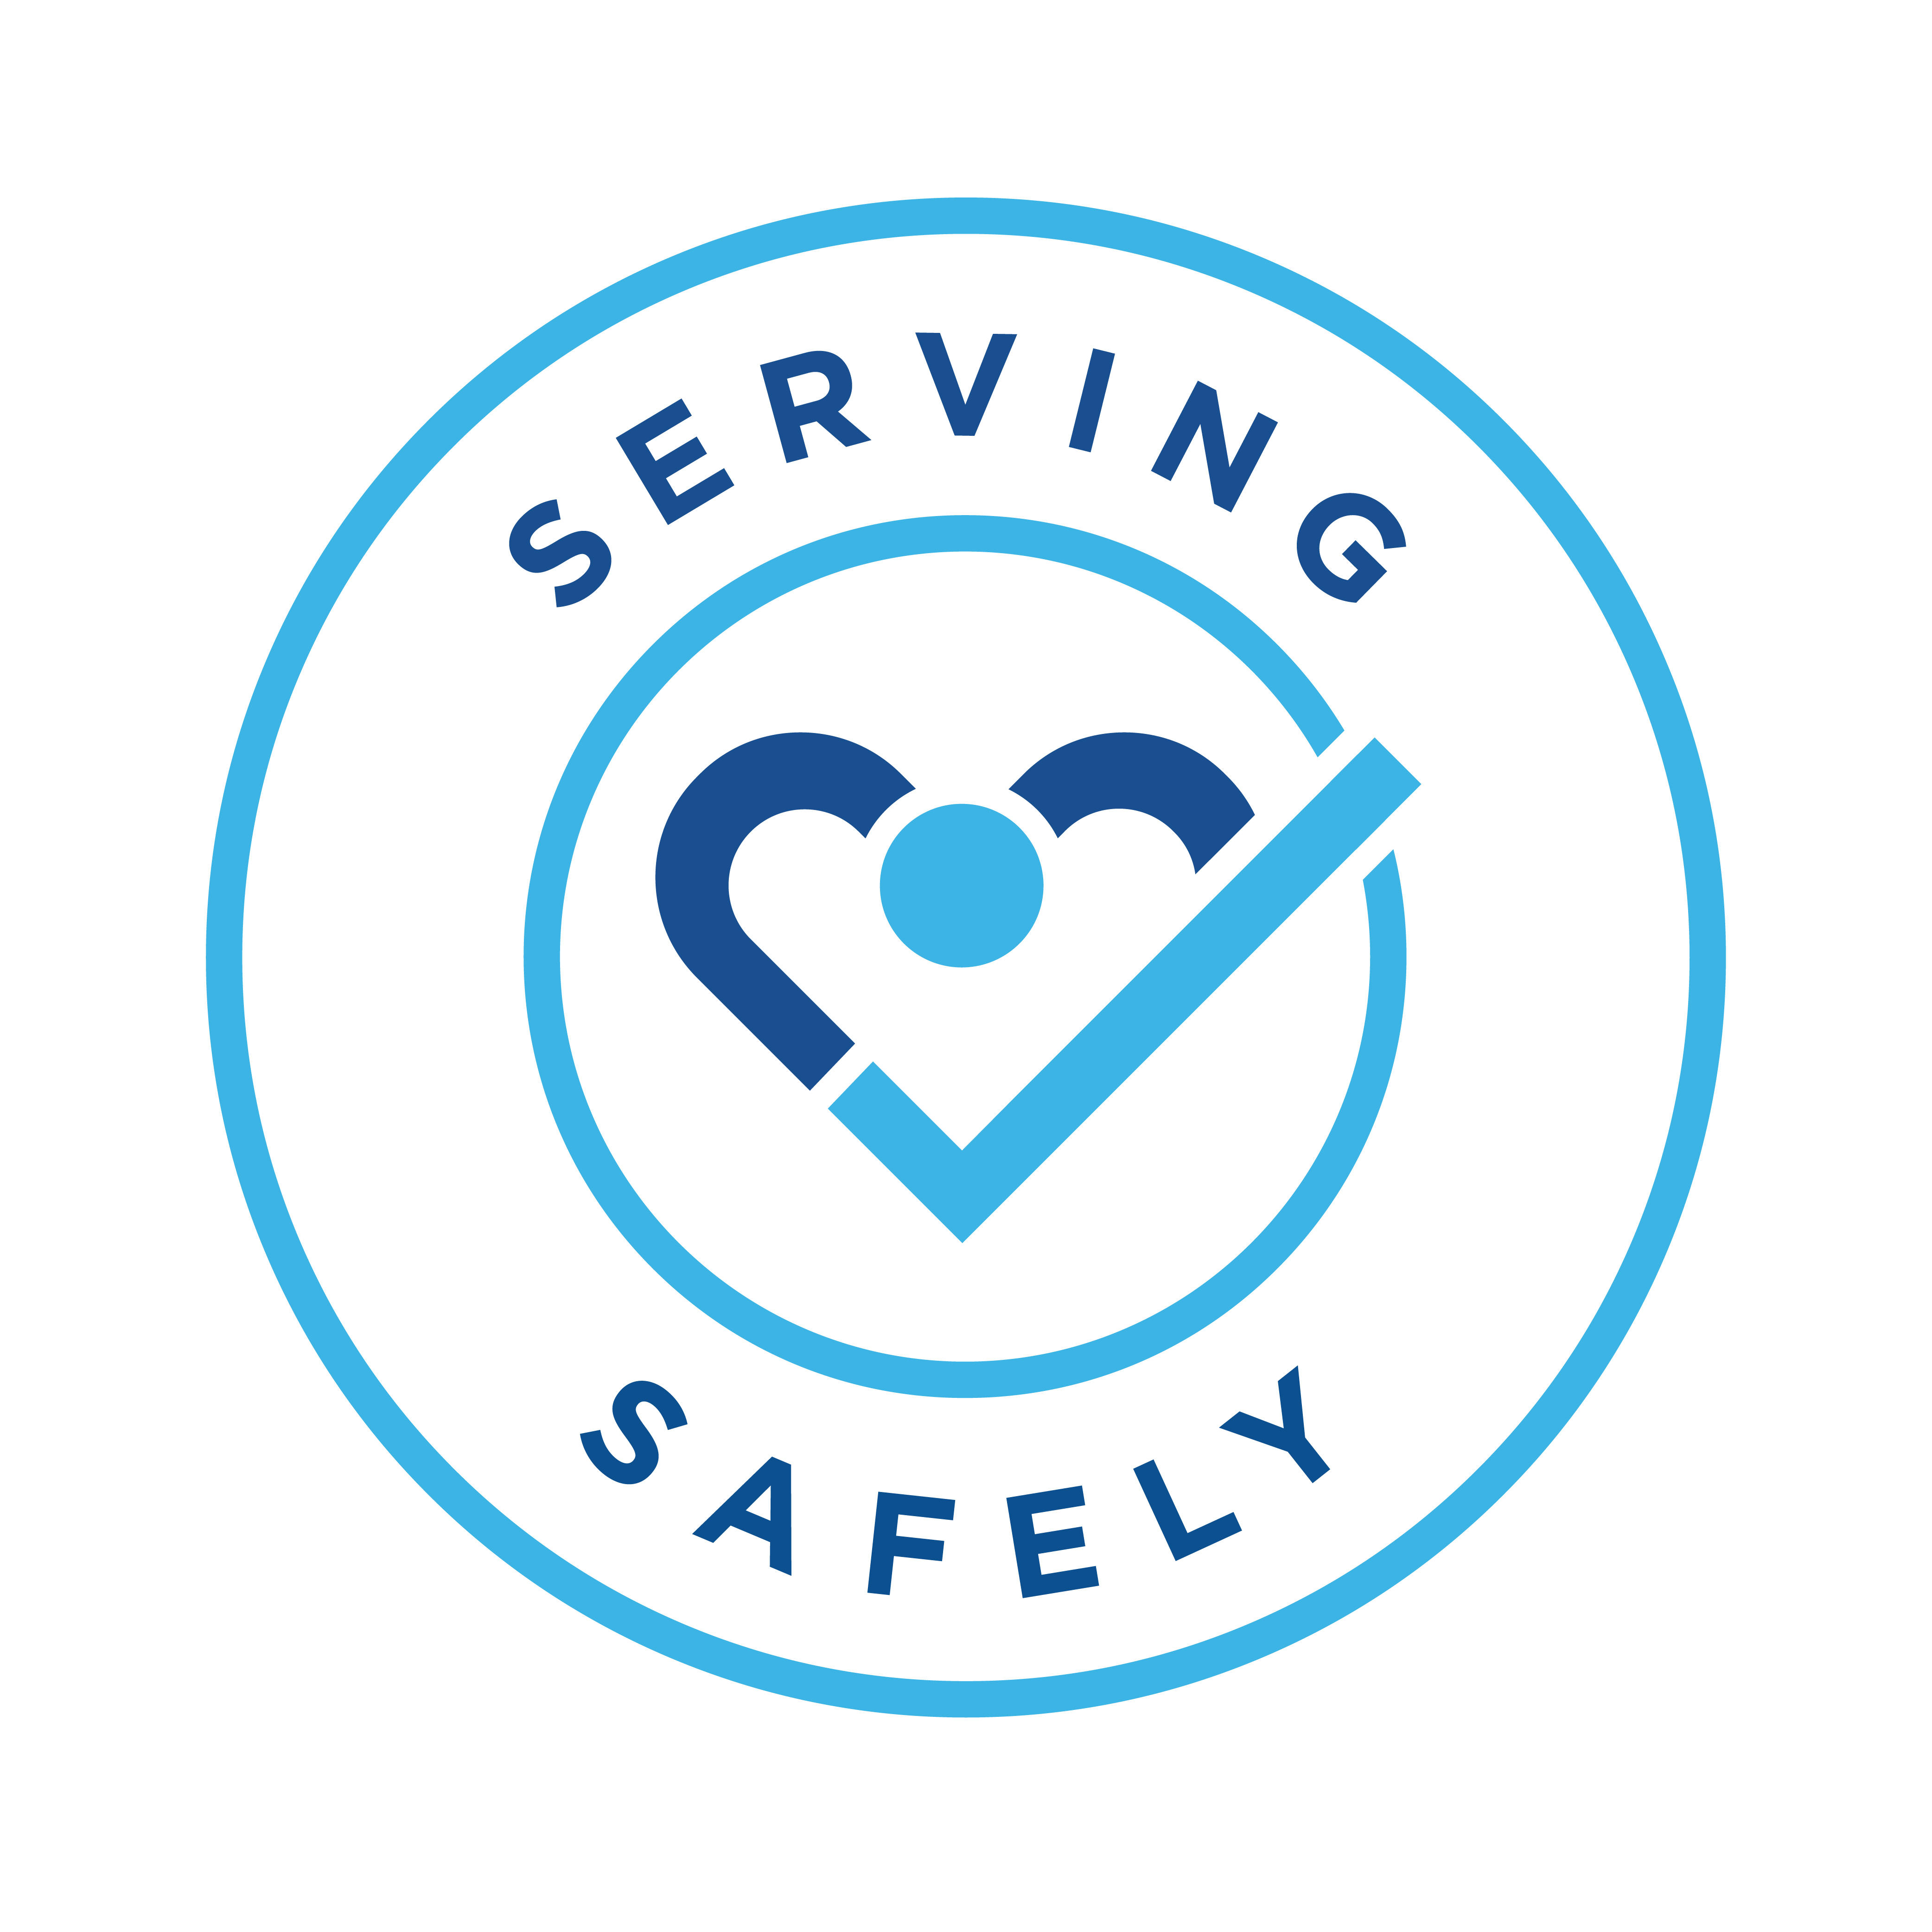 Nothing is more important to us than your health and safety. Our Serving Safely commitment means you can feel confident we're going above and beyond to put your safety first, no matter what.